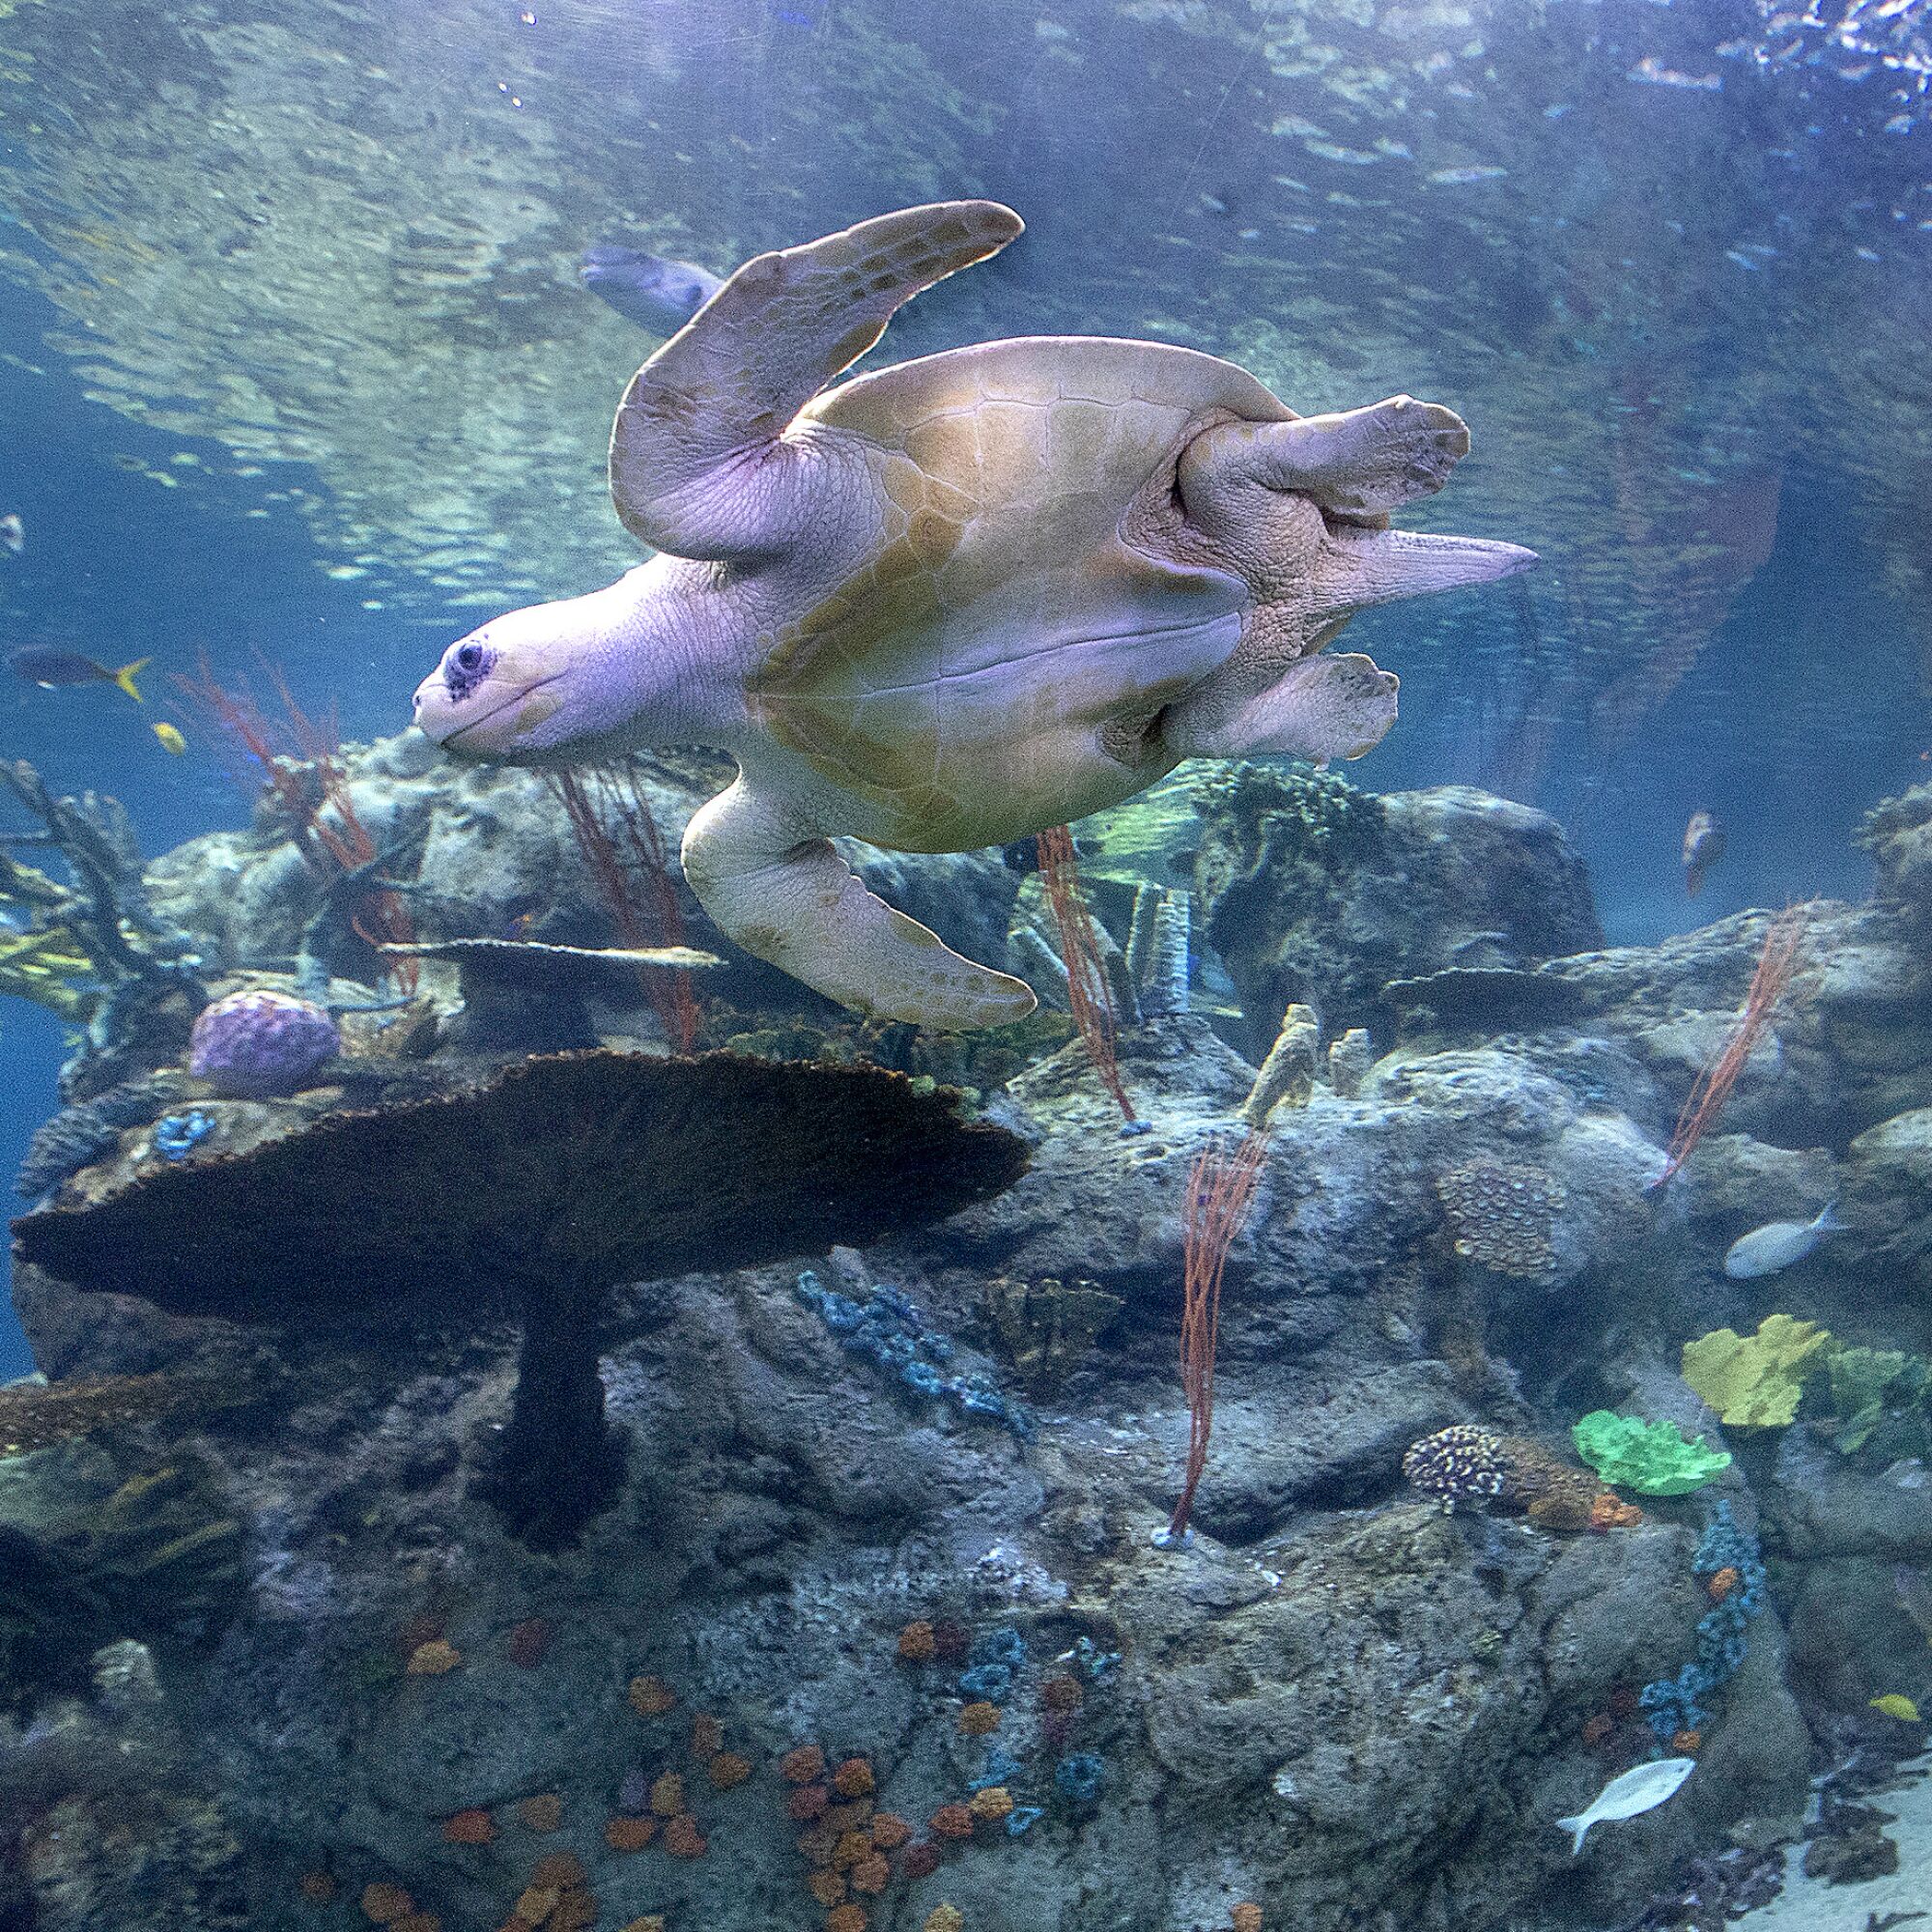 A sea turtle swims inside a tank at the Aquarium of the Pacific in Long Beach.